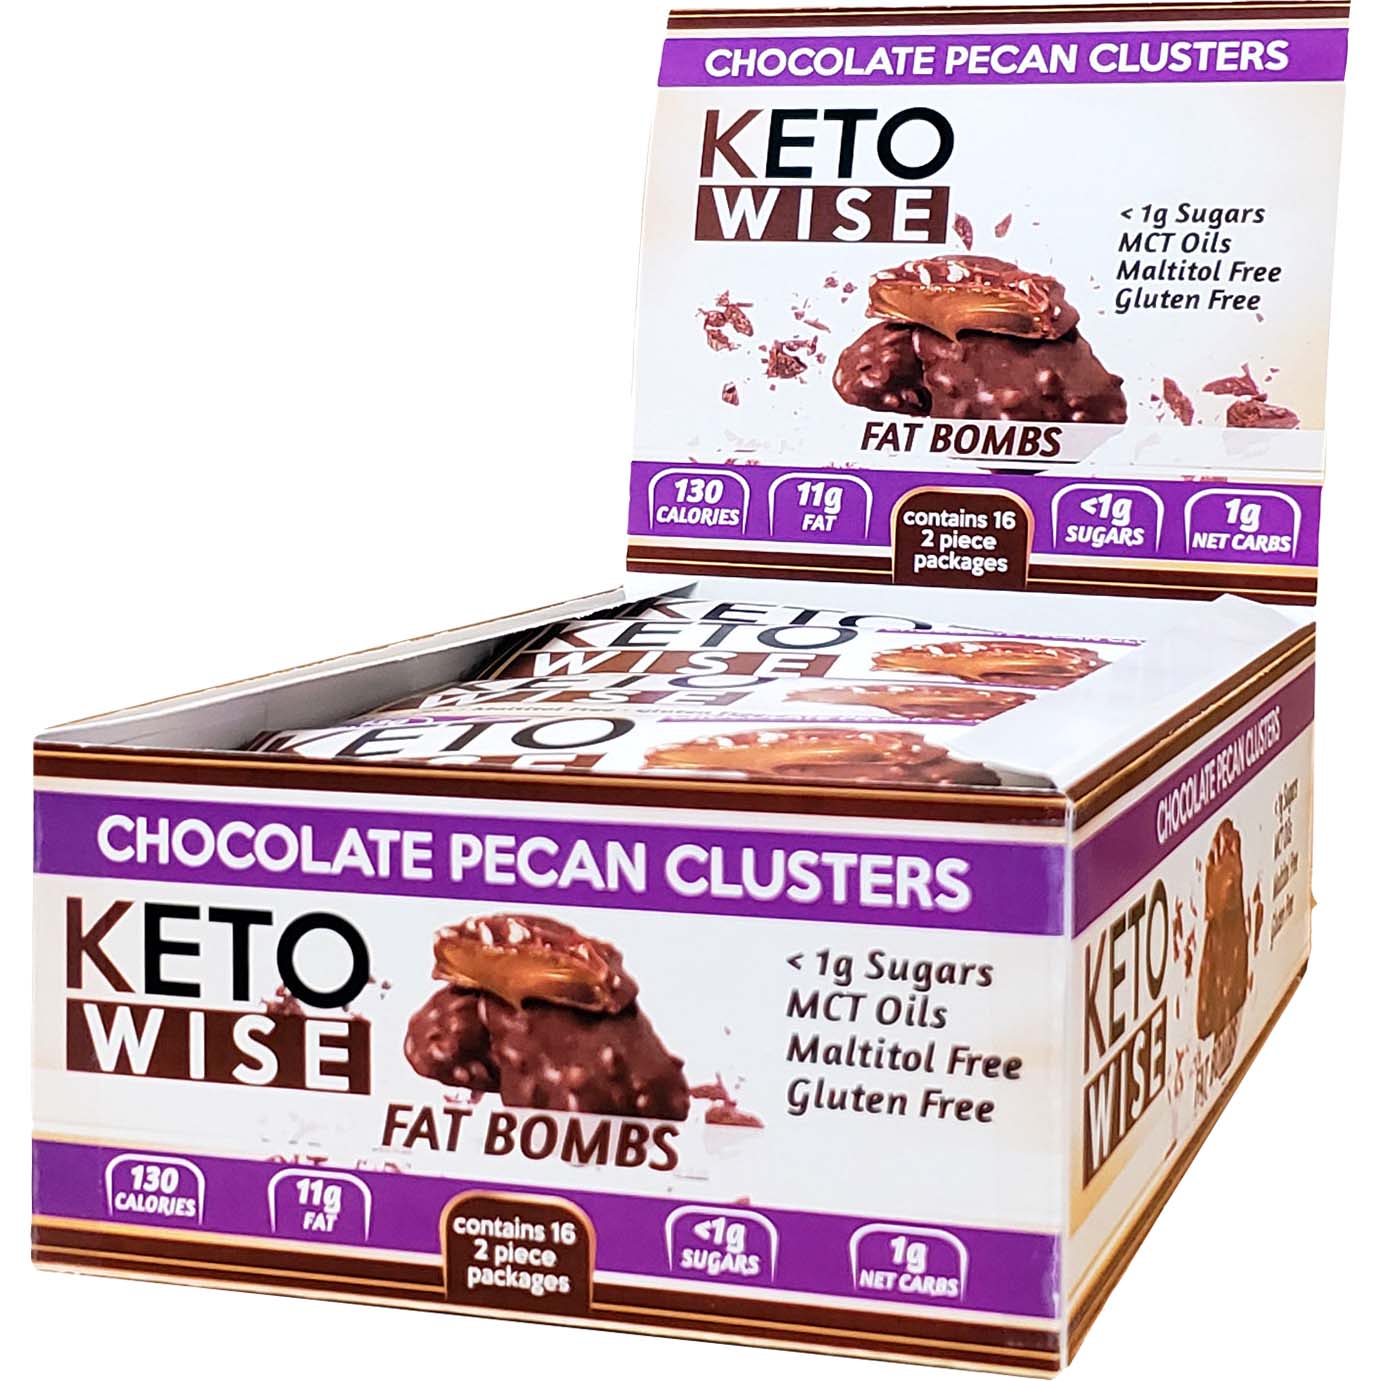 Keto Wise Fat Bombs Box of 16 Pieces Chocolate Pecan Clusters